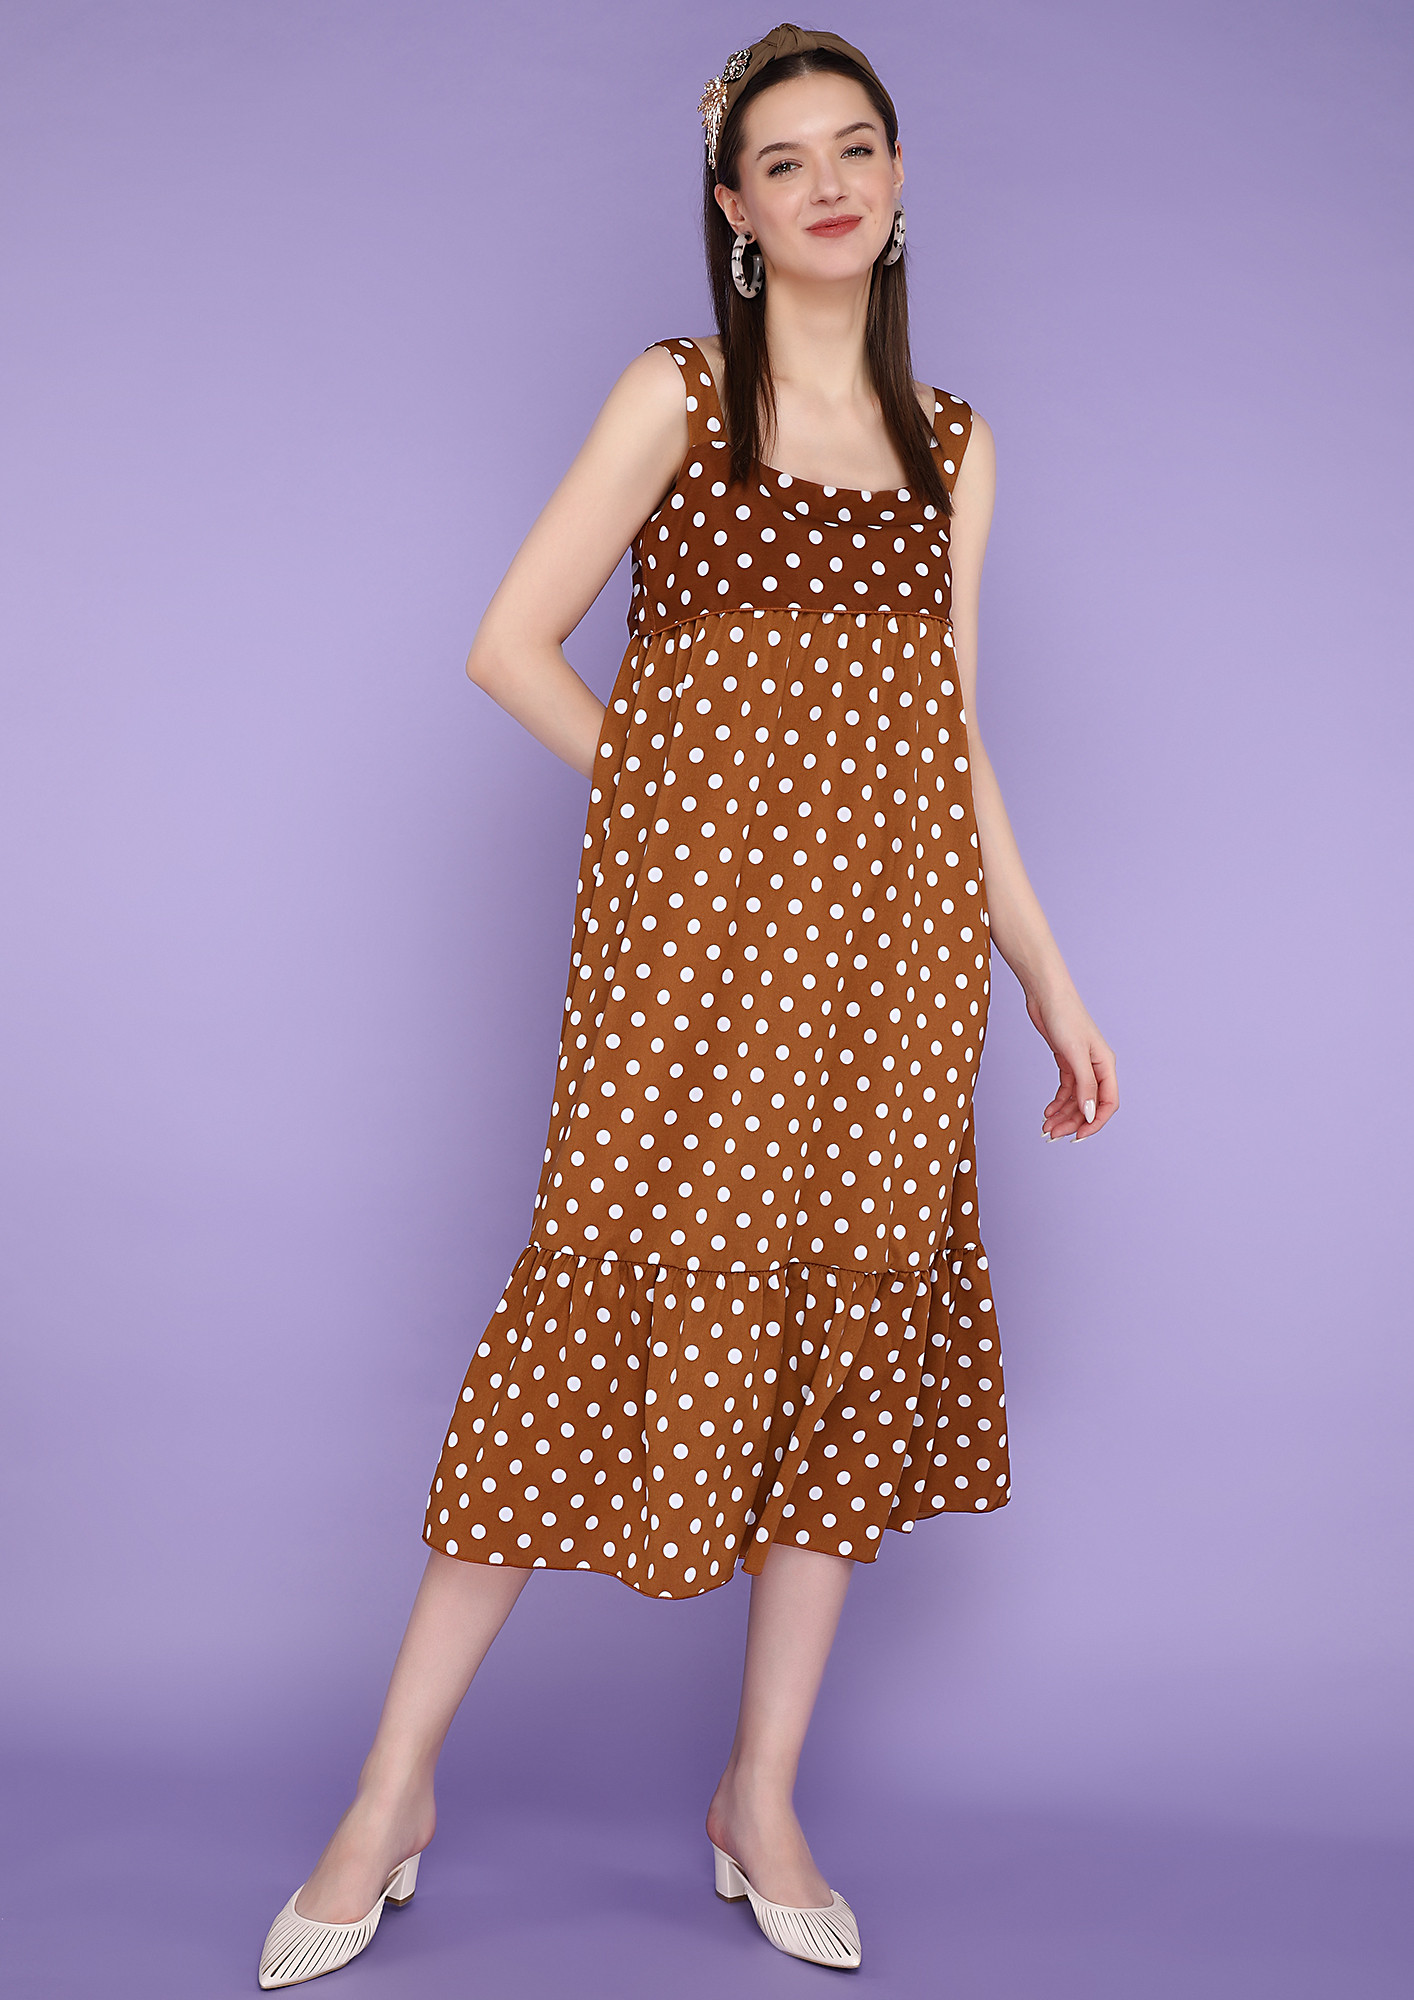 WRAPPED IN POLKA DOTS BROWN DRESS